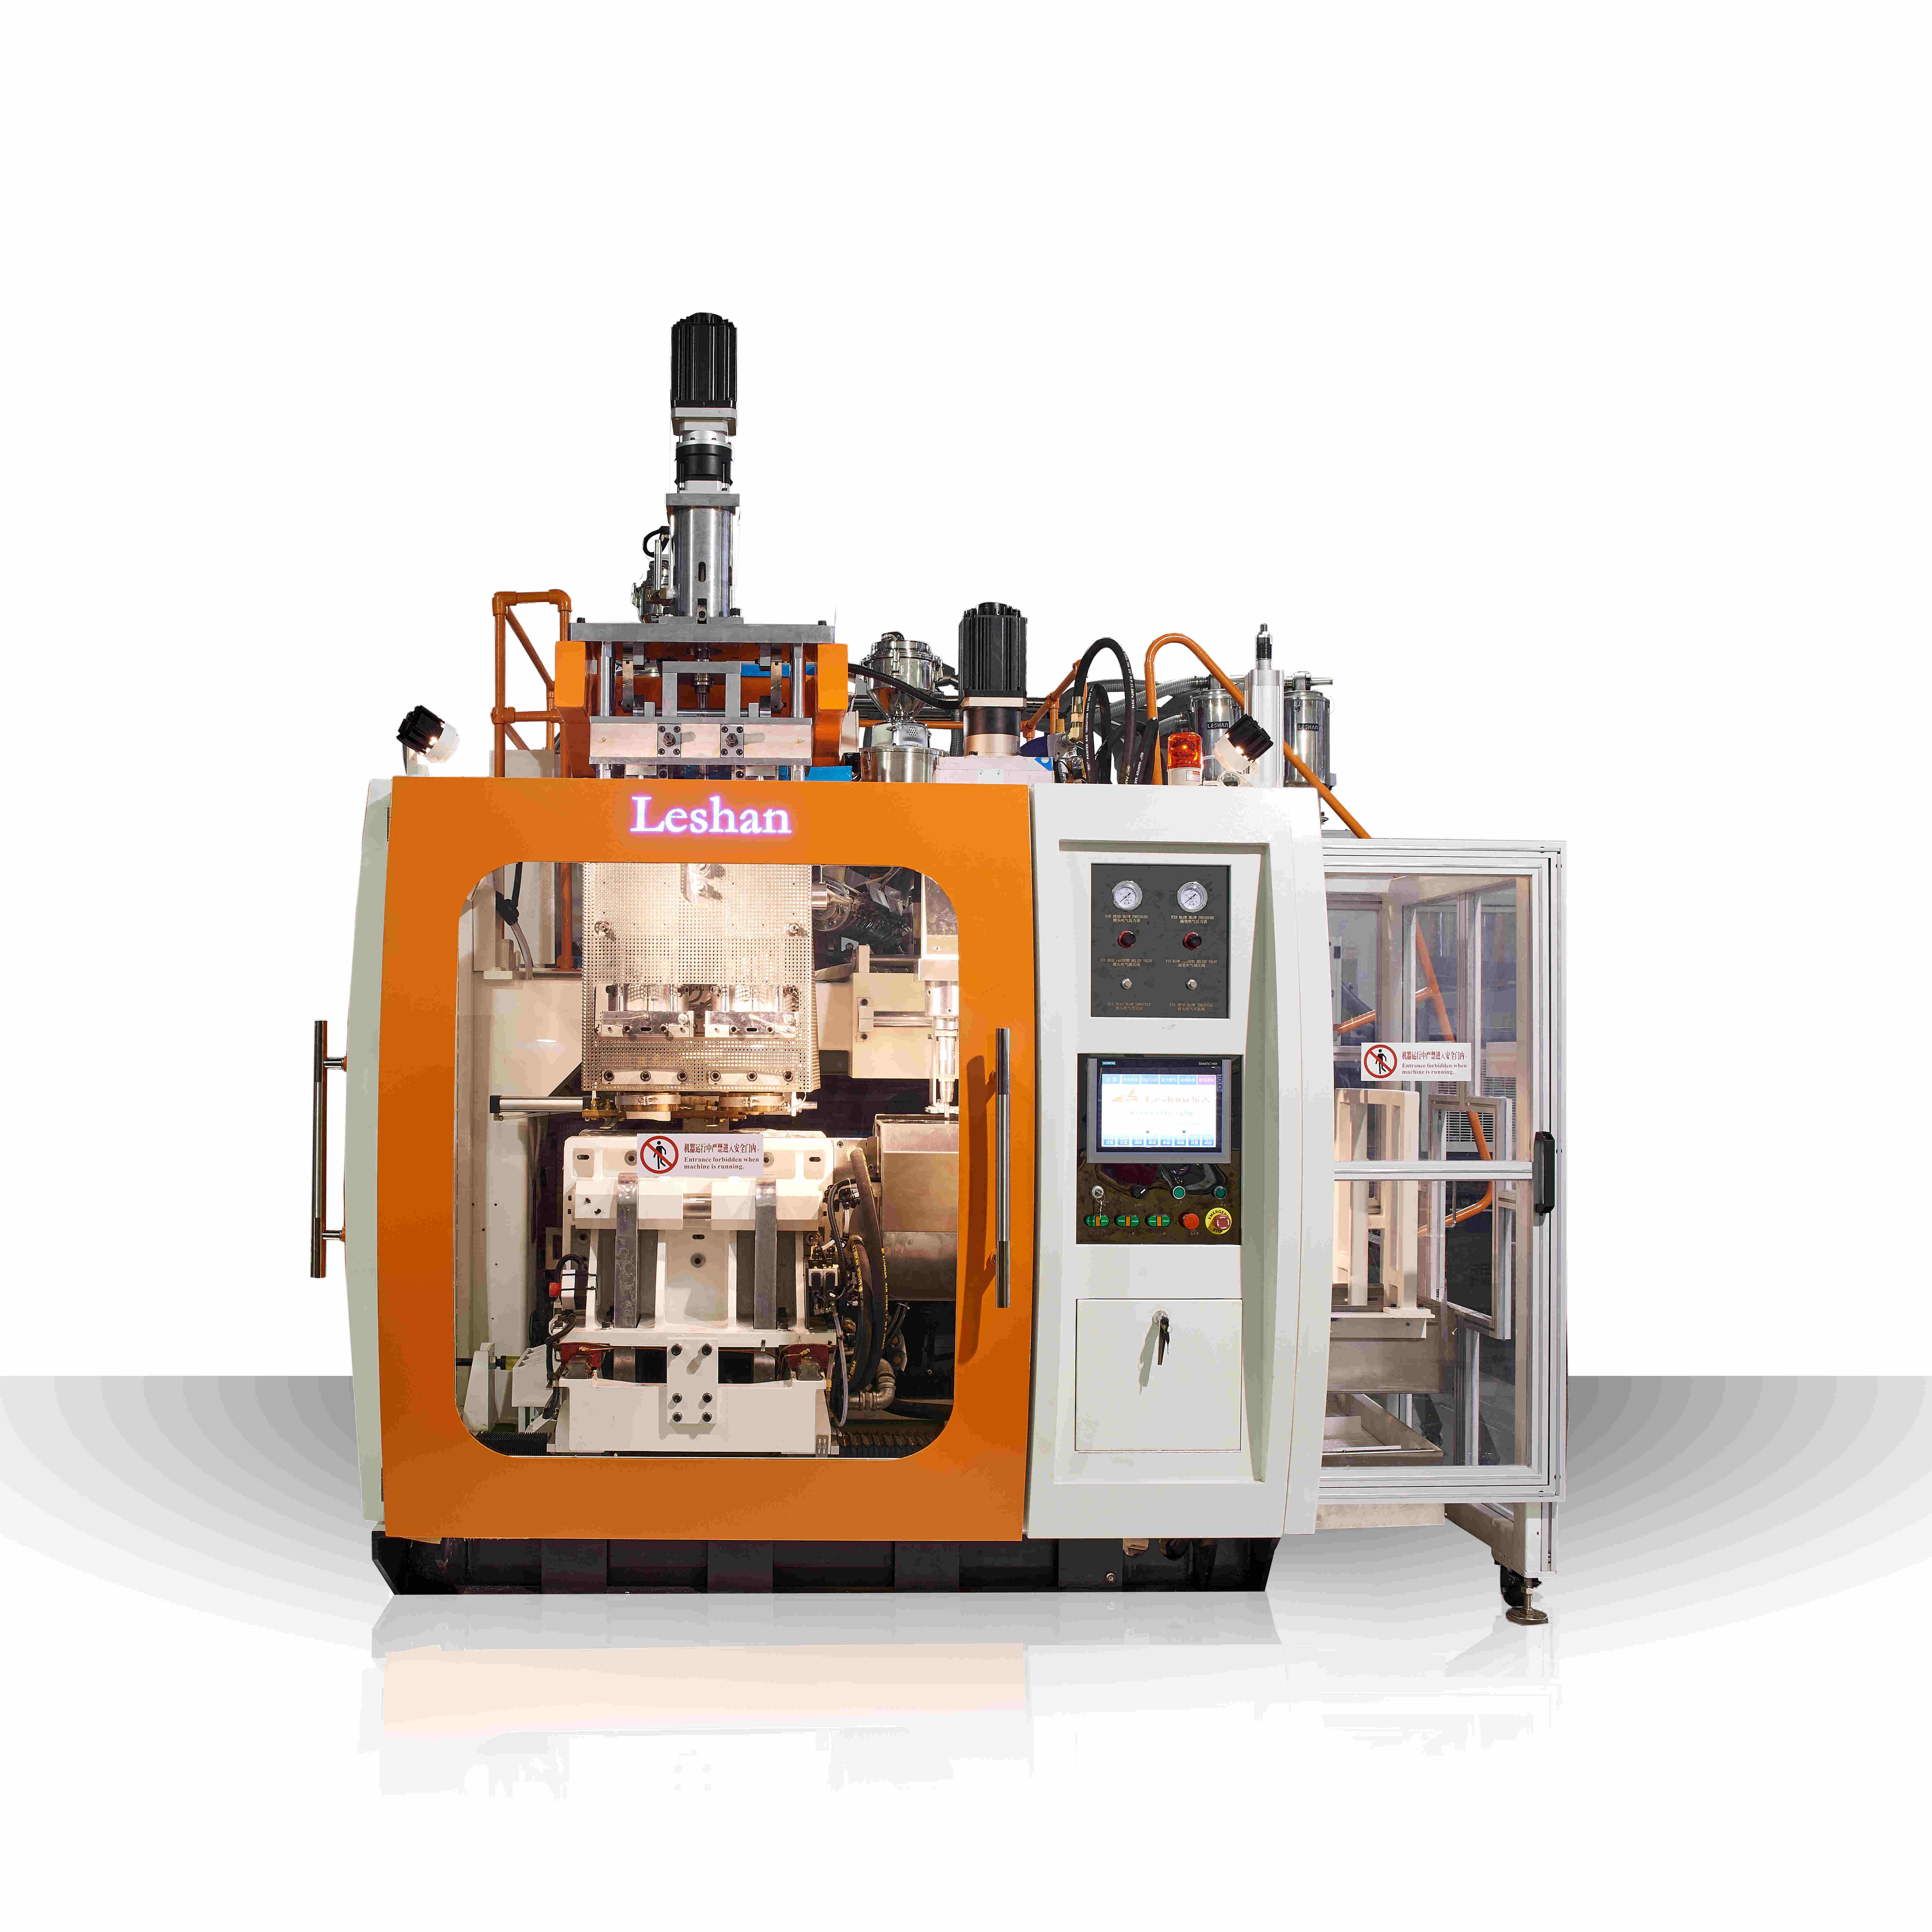 How long does it usually take to troubleshoot china hdpe blow molding machine?